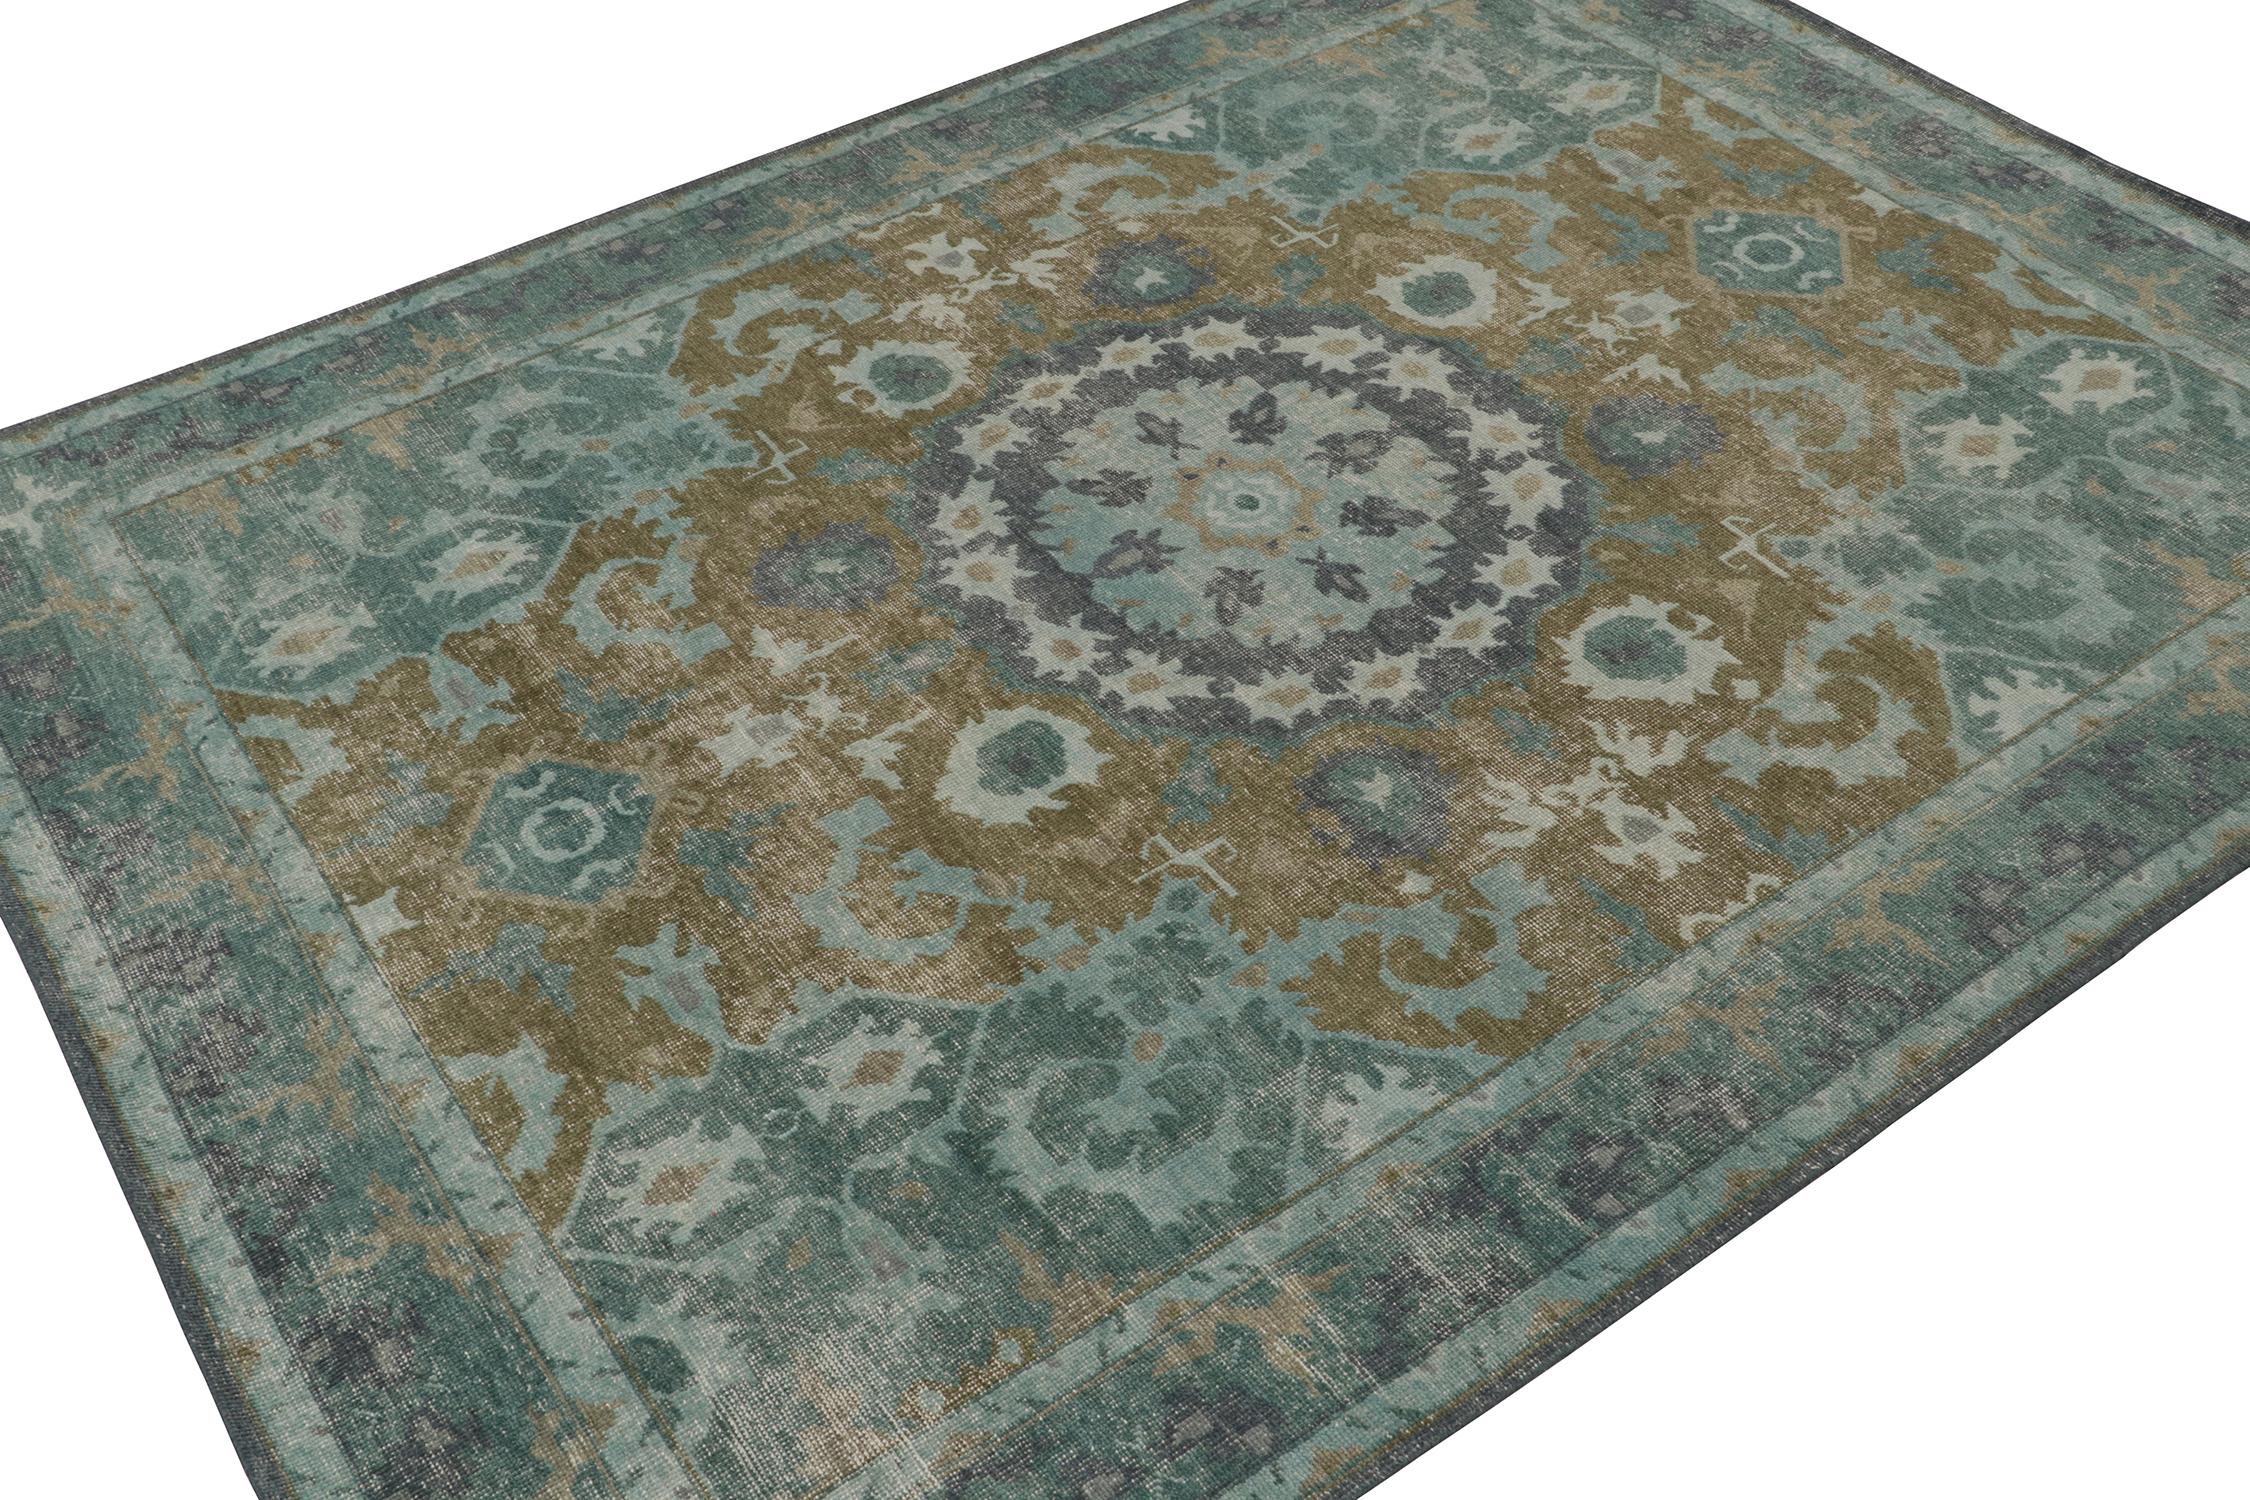 This 9x12 rug is a new addition to Rug & Kilim’s Homage Collection.  Hand-knotted in distressed style wool and cotton.

Further On the Design: 

This design enjoys an elaborate medallion geometric pattern in varied blues atop a brown background with